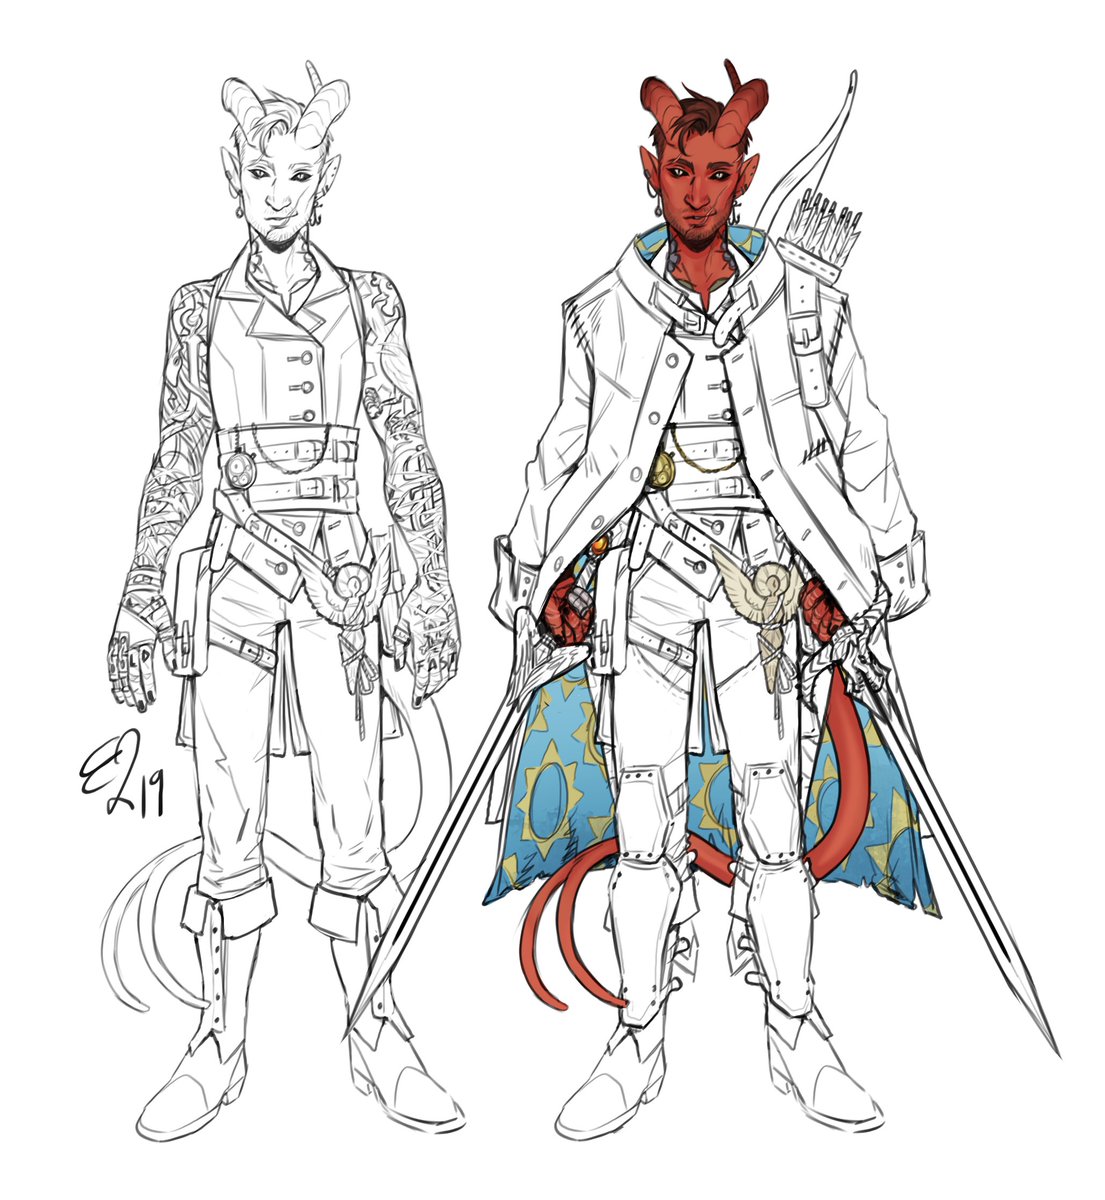 this is maybe not a huge one but my boy kit (bloodhunter paladin tiefling) is missing two fingers on his right hand and i love that it's the opposite two of where i lost feeling to**. its small and a little silly coincidence but it makes me smile 